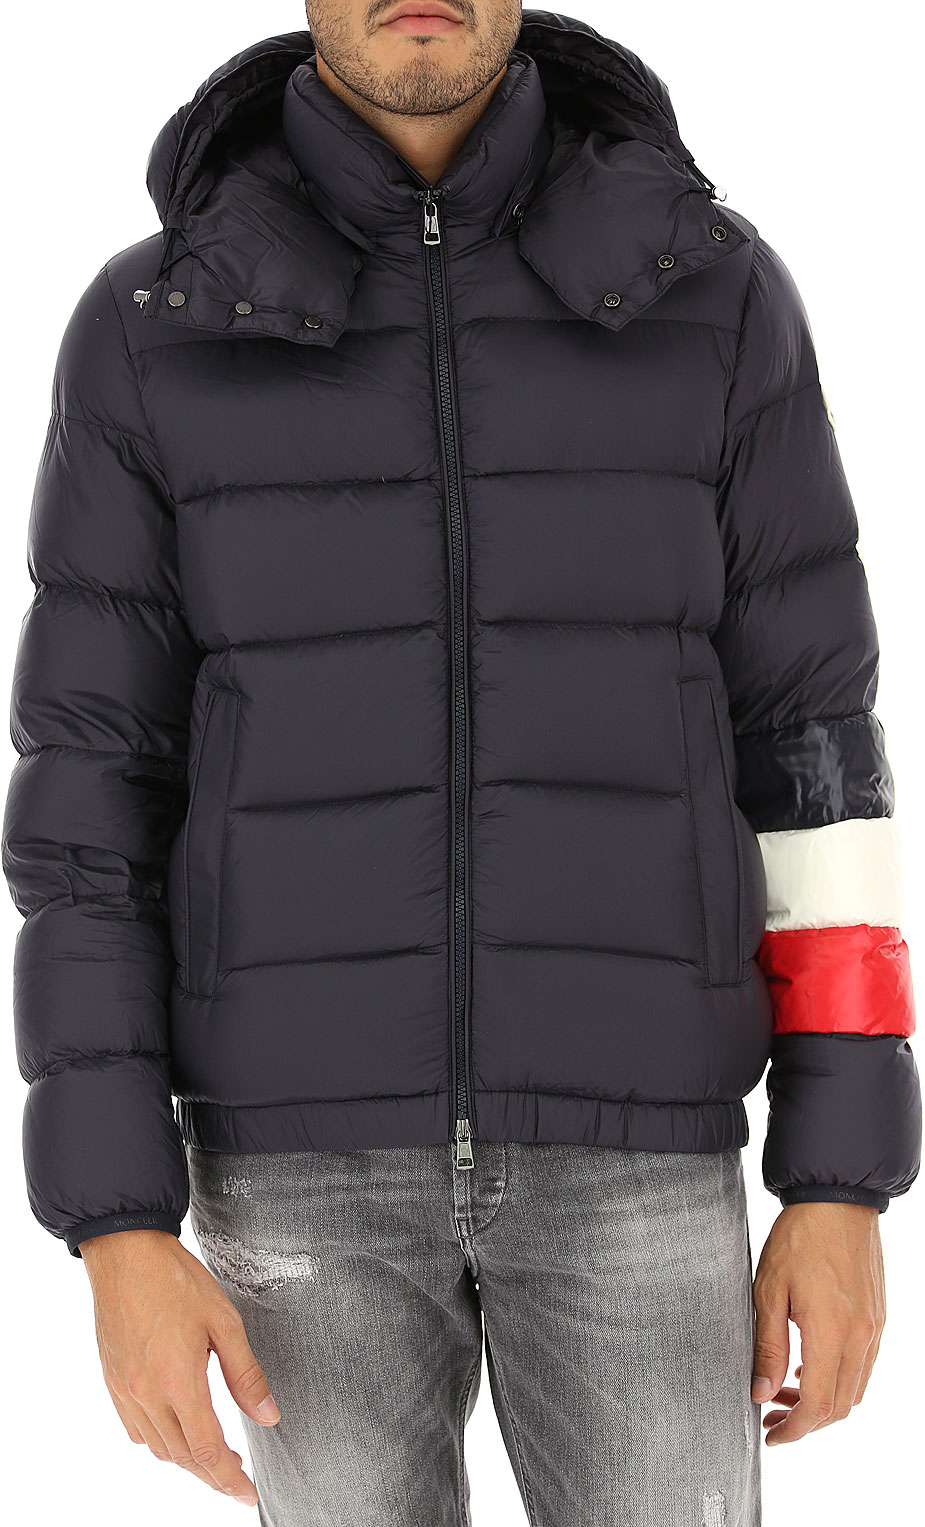 Mens Clothing Moncler, Style code: 4135585c0104-742-willmgiubbotto